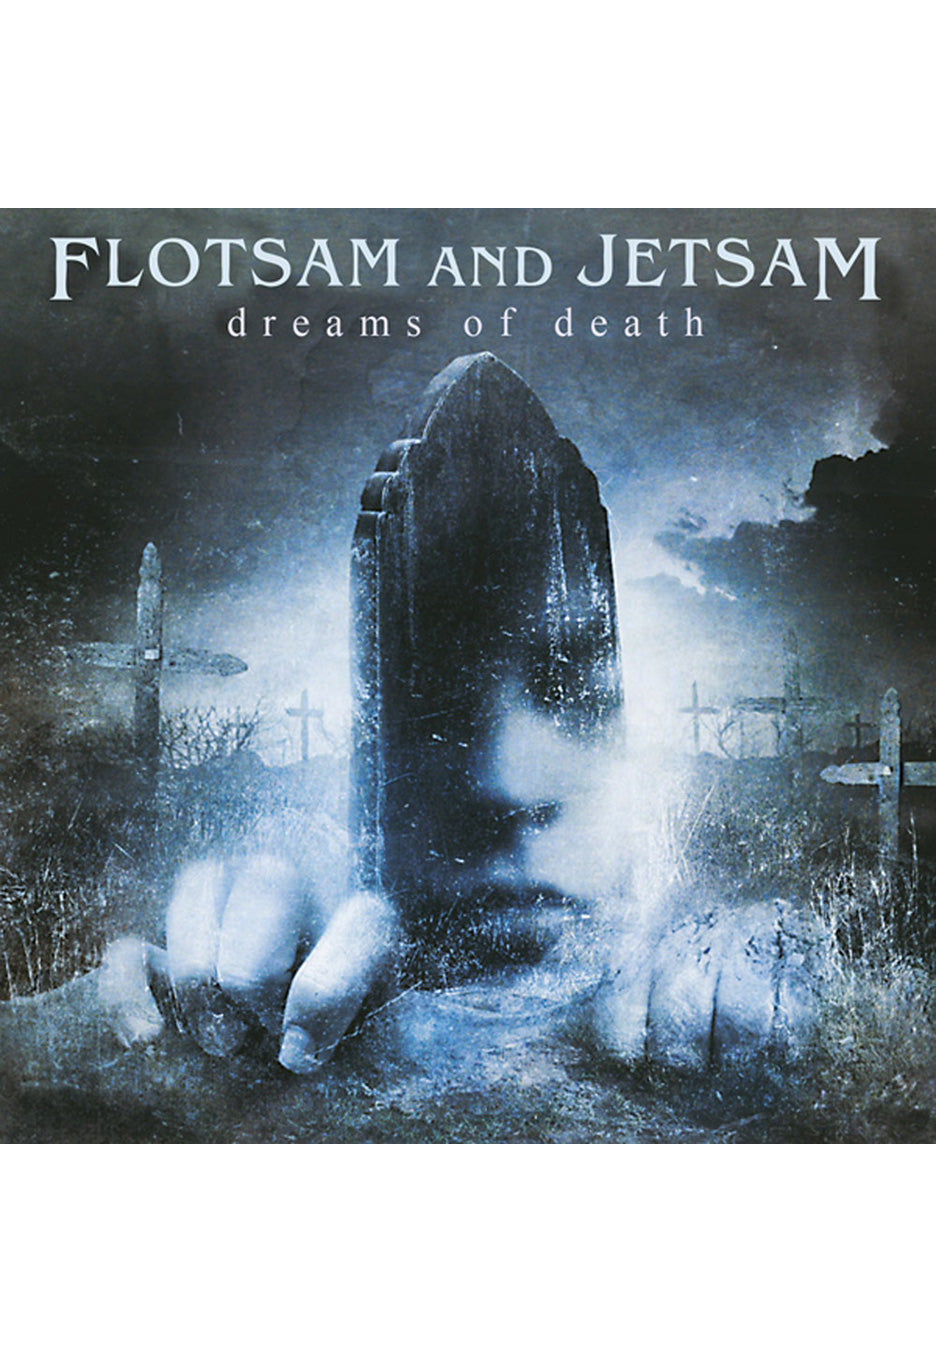 Flotsam And Jetsam - Dreams Of Death Clear - Colored Vinyl